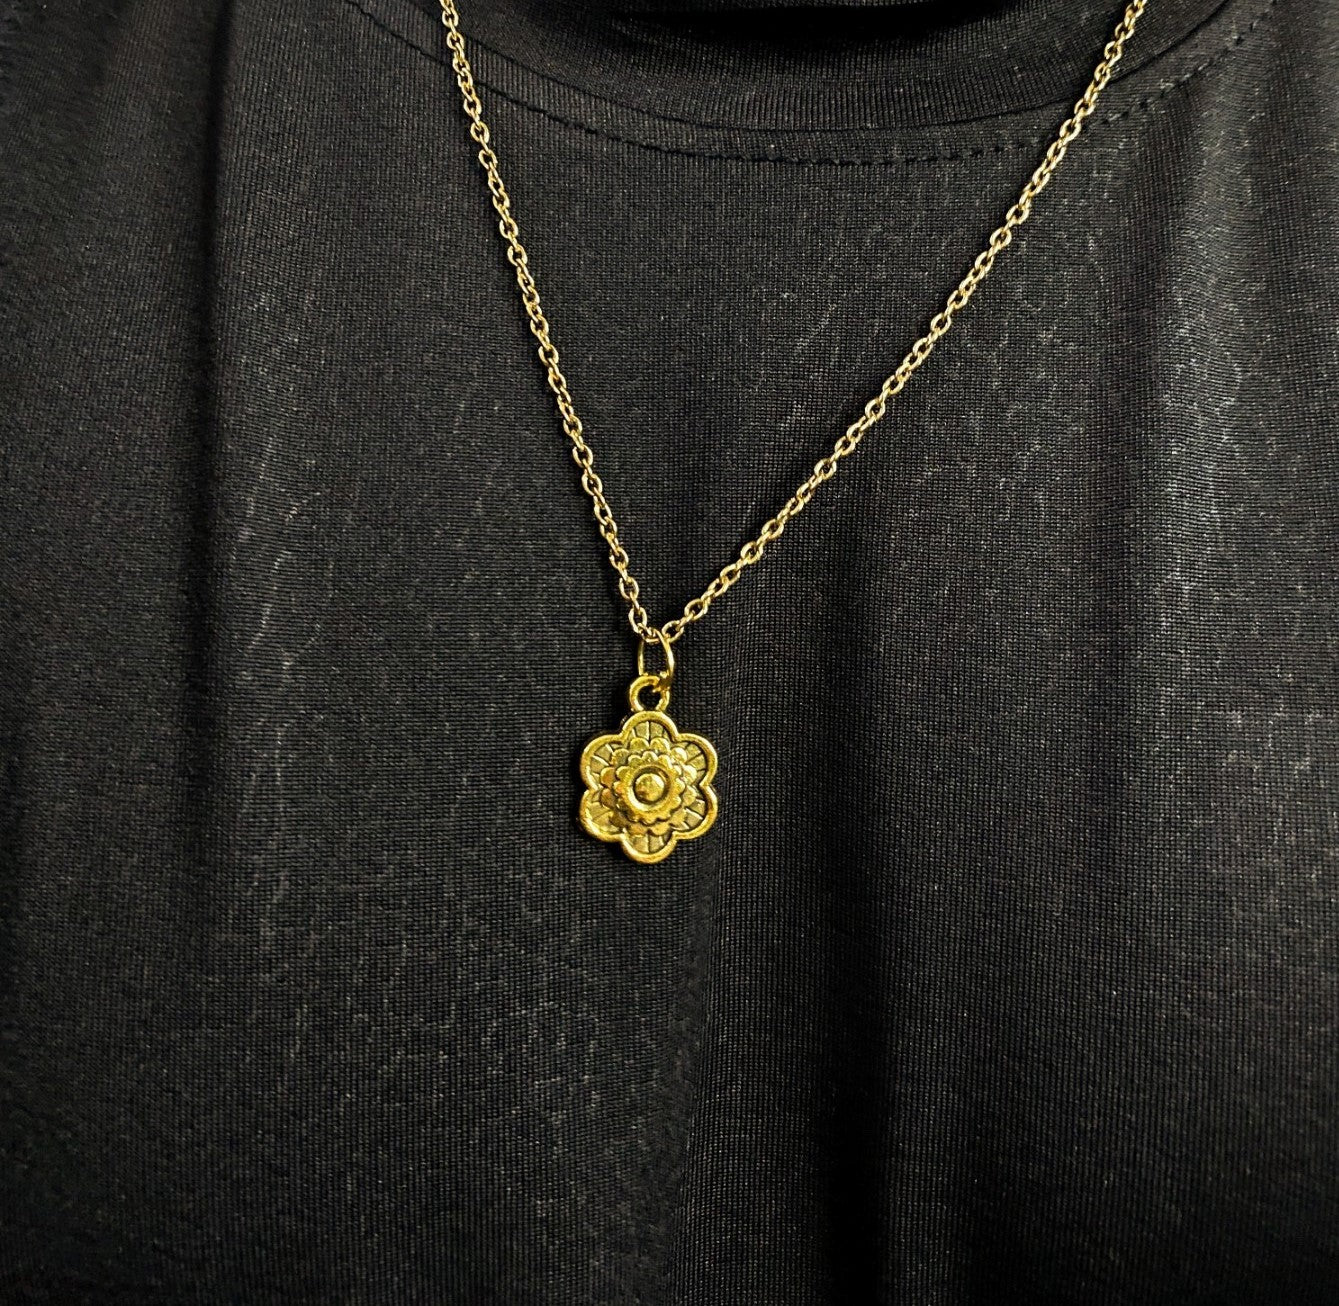 Golden Flower Pendant With Chain